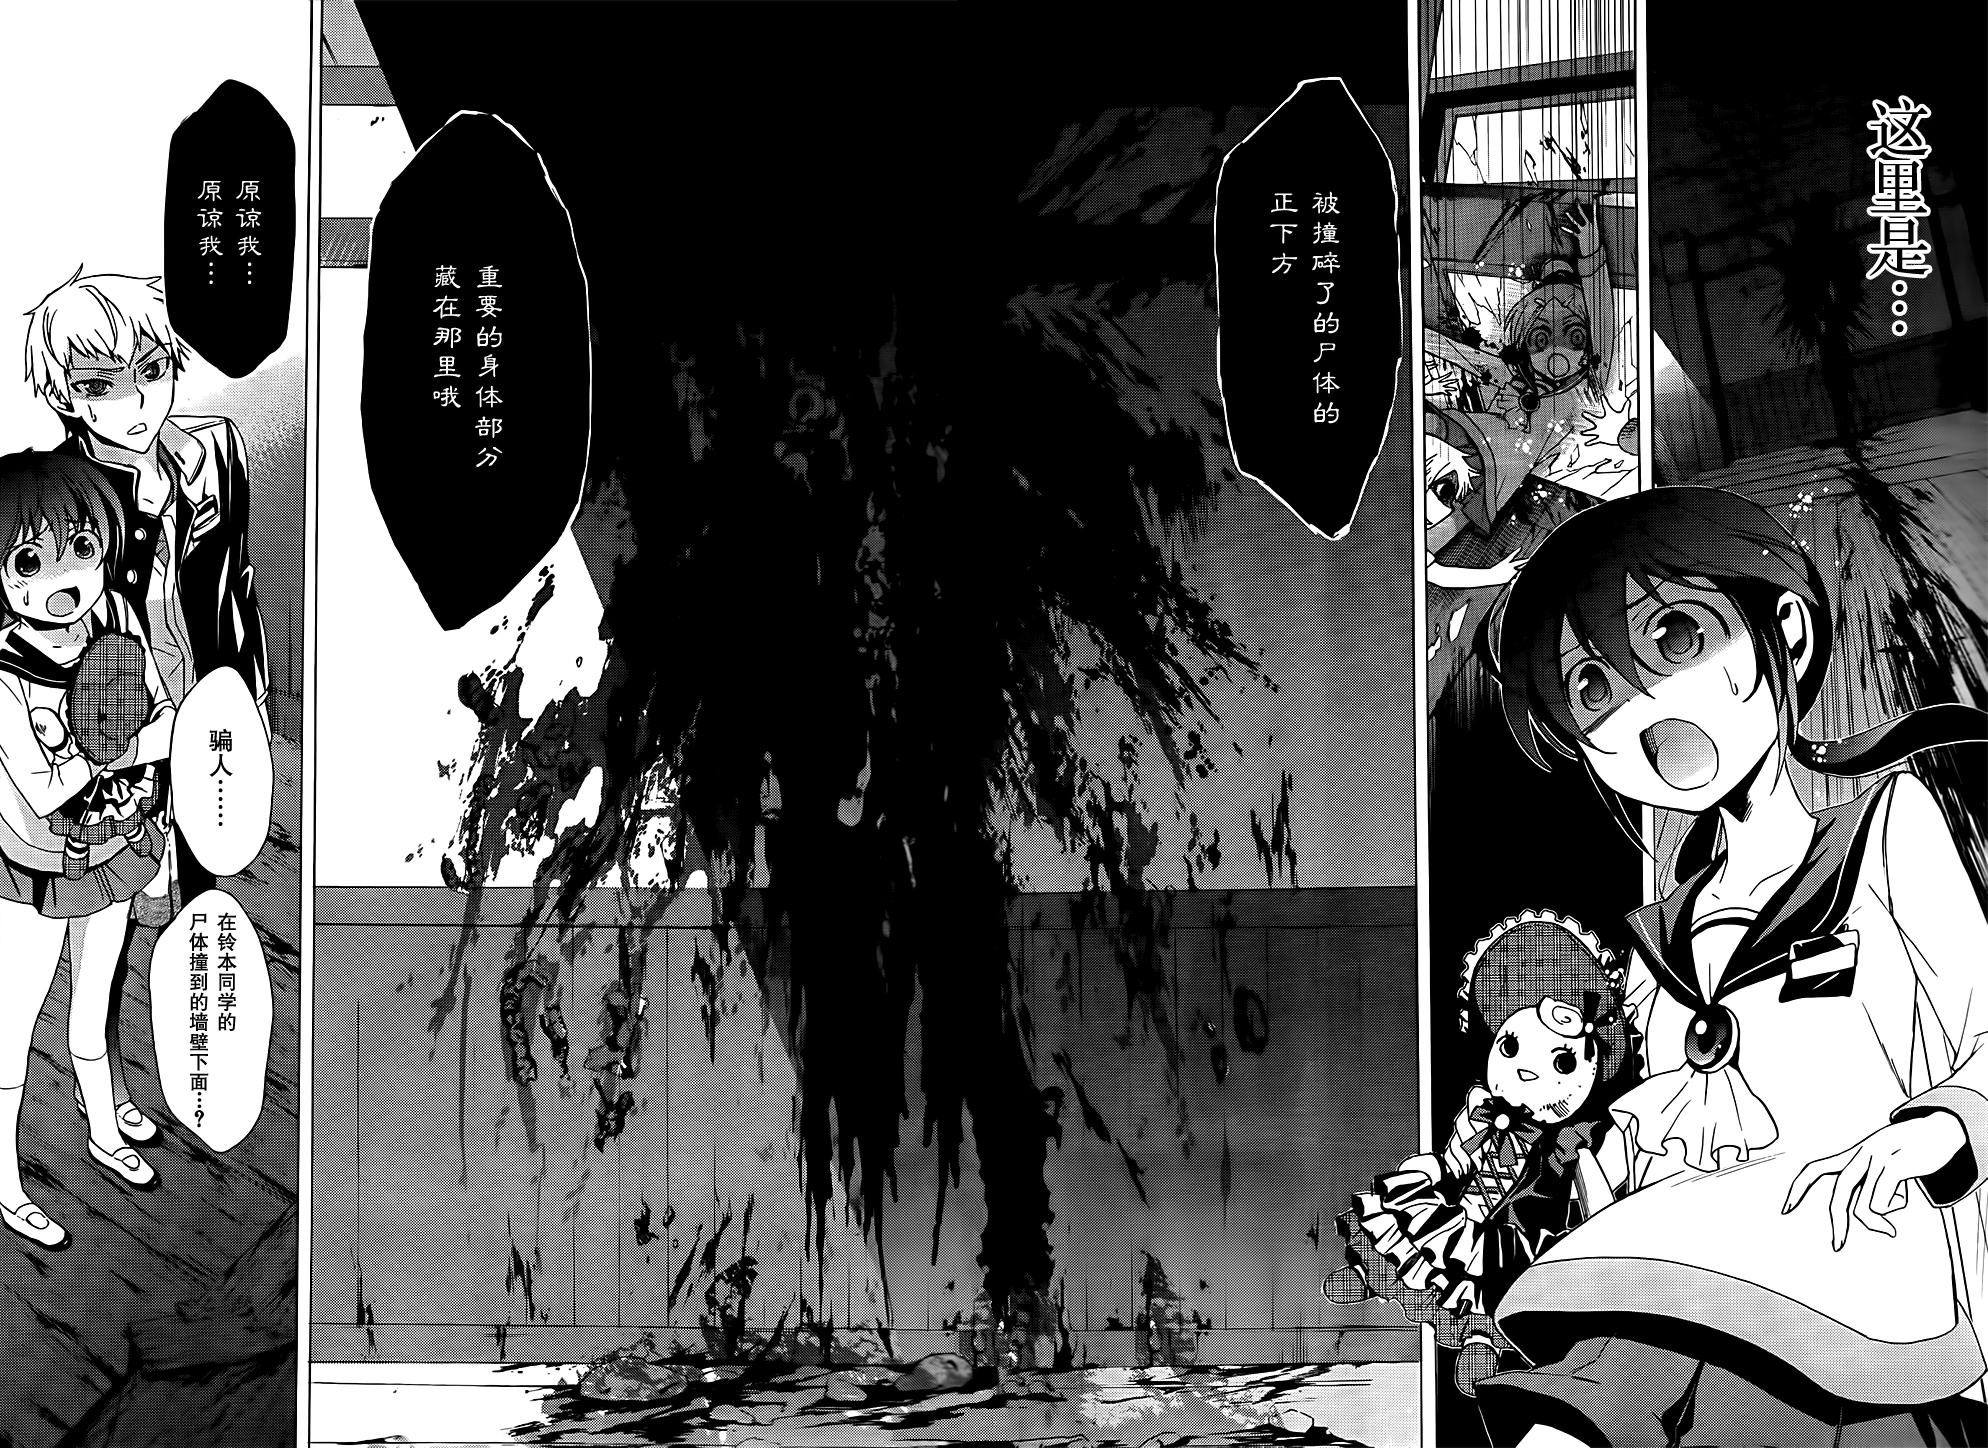 BLOOD_COVERED - 第26话 - 4